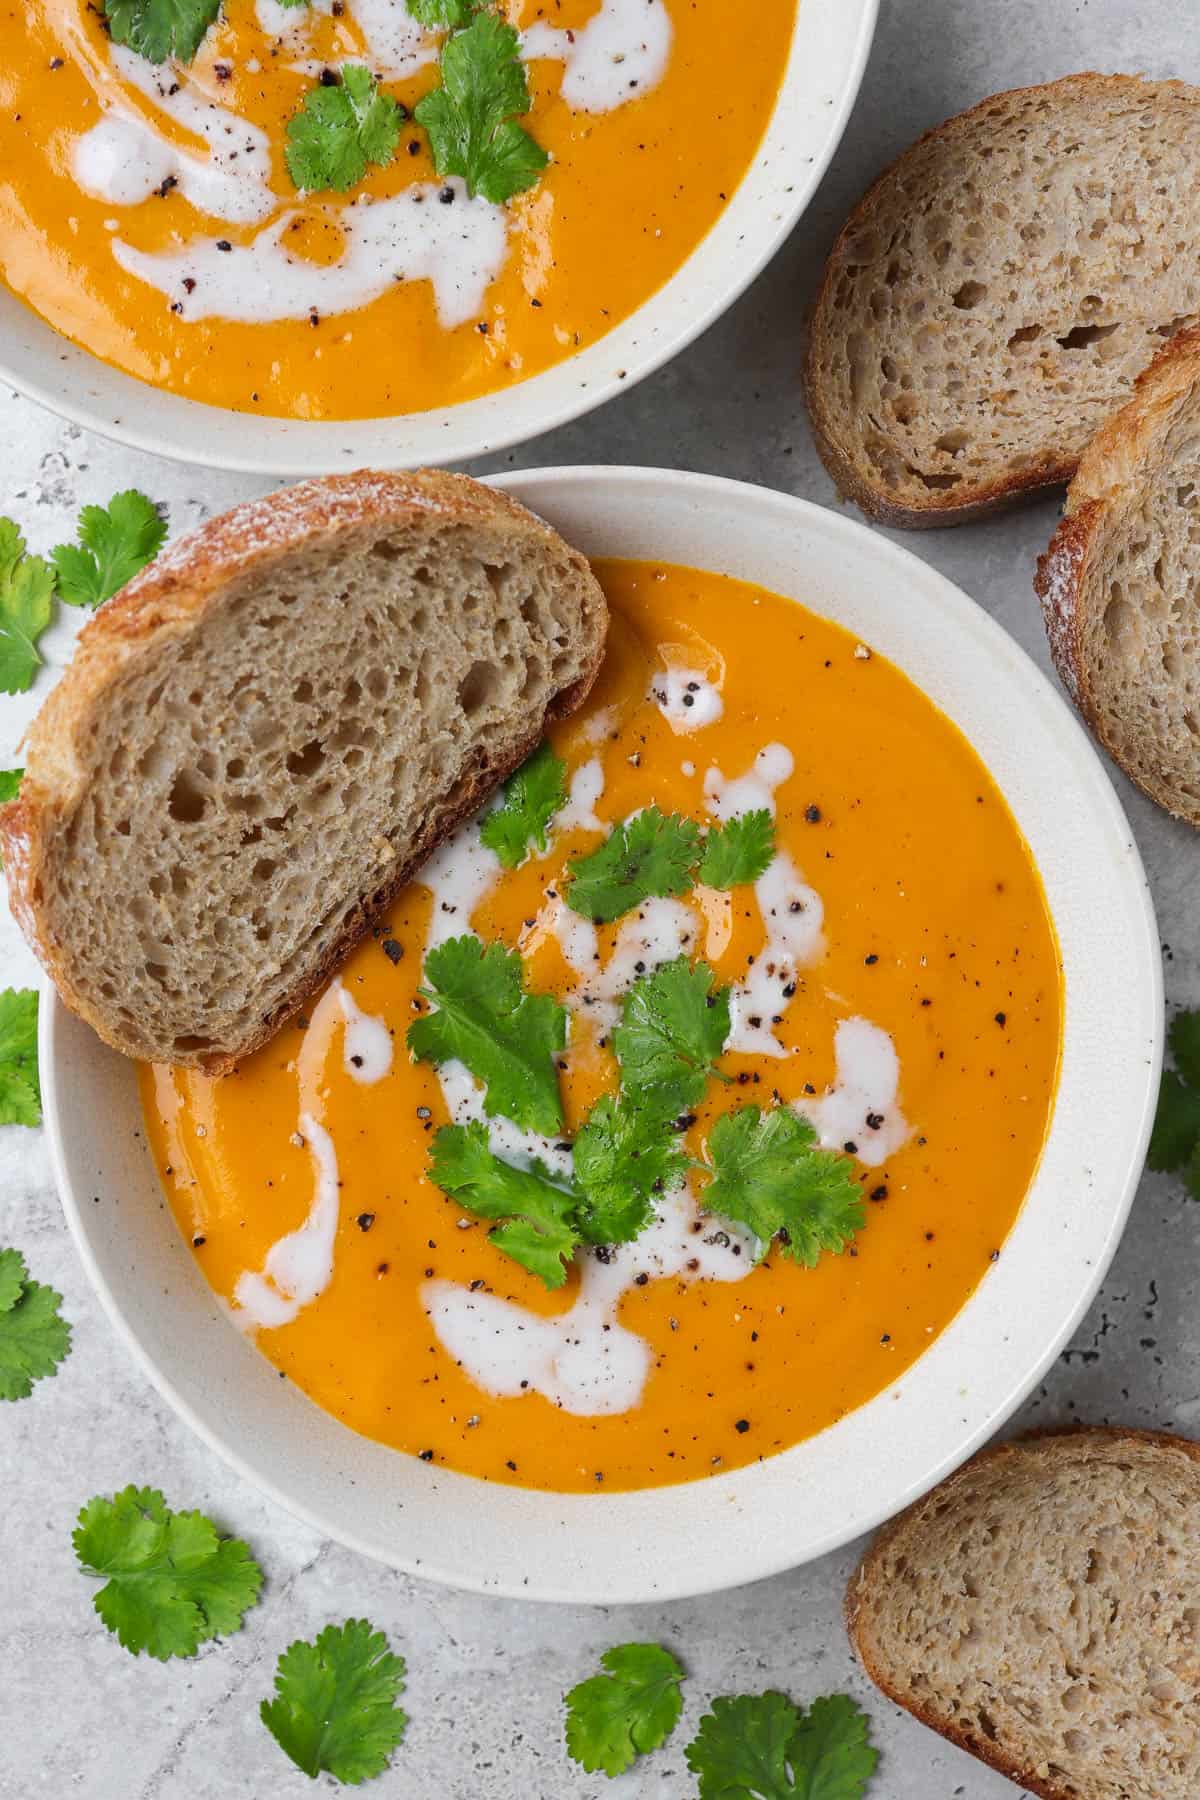 Carrot swede soup in a bowl with sourdough dunked in.